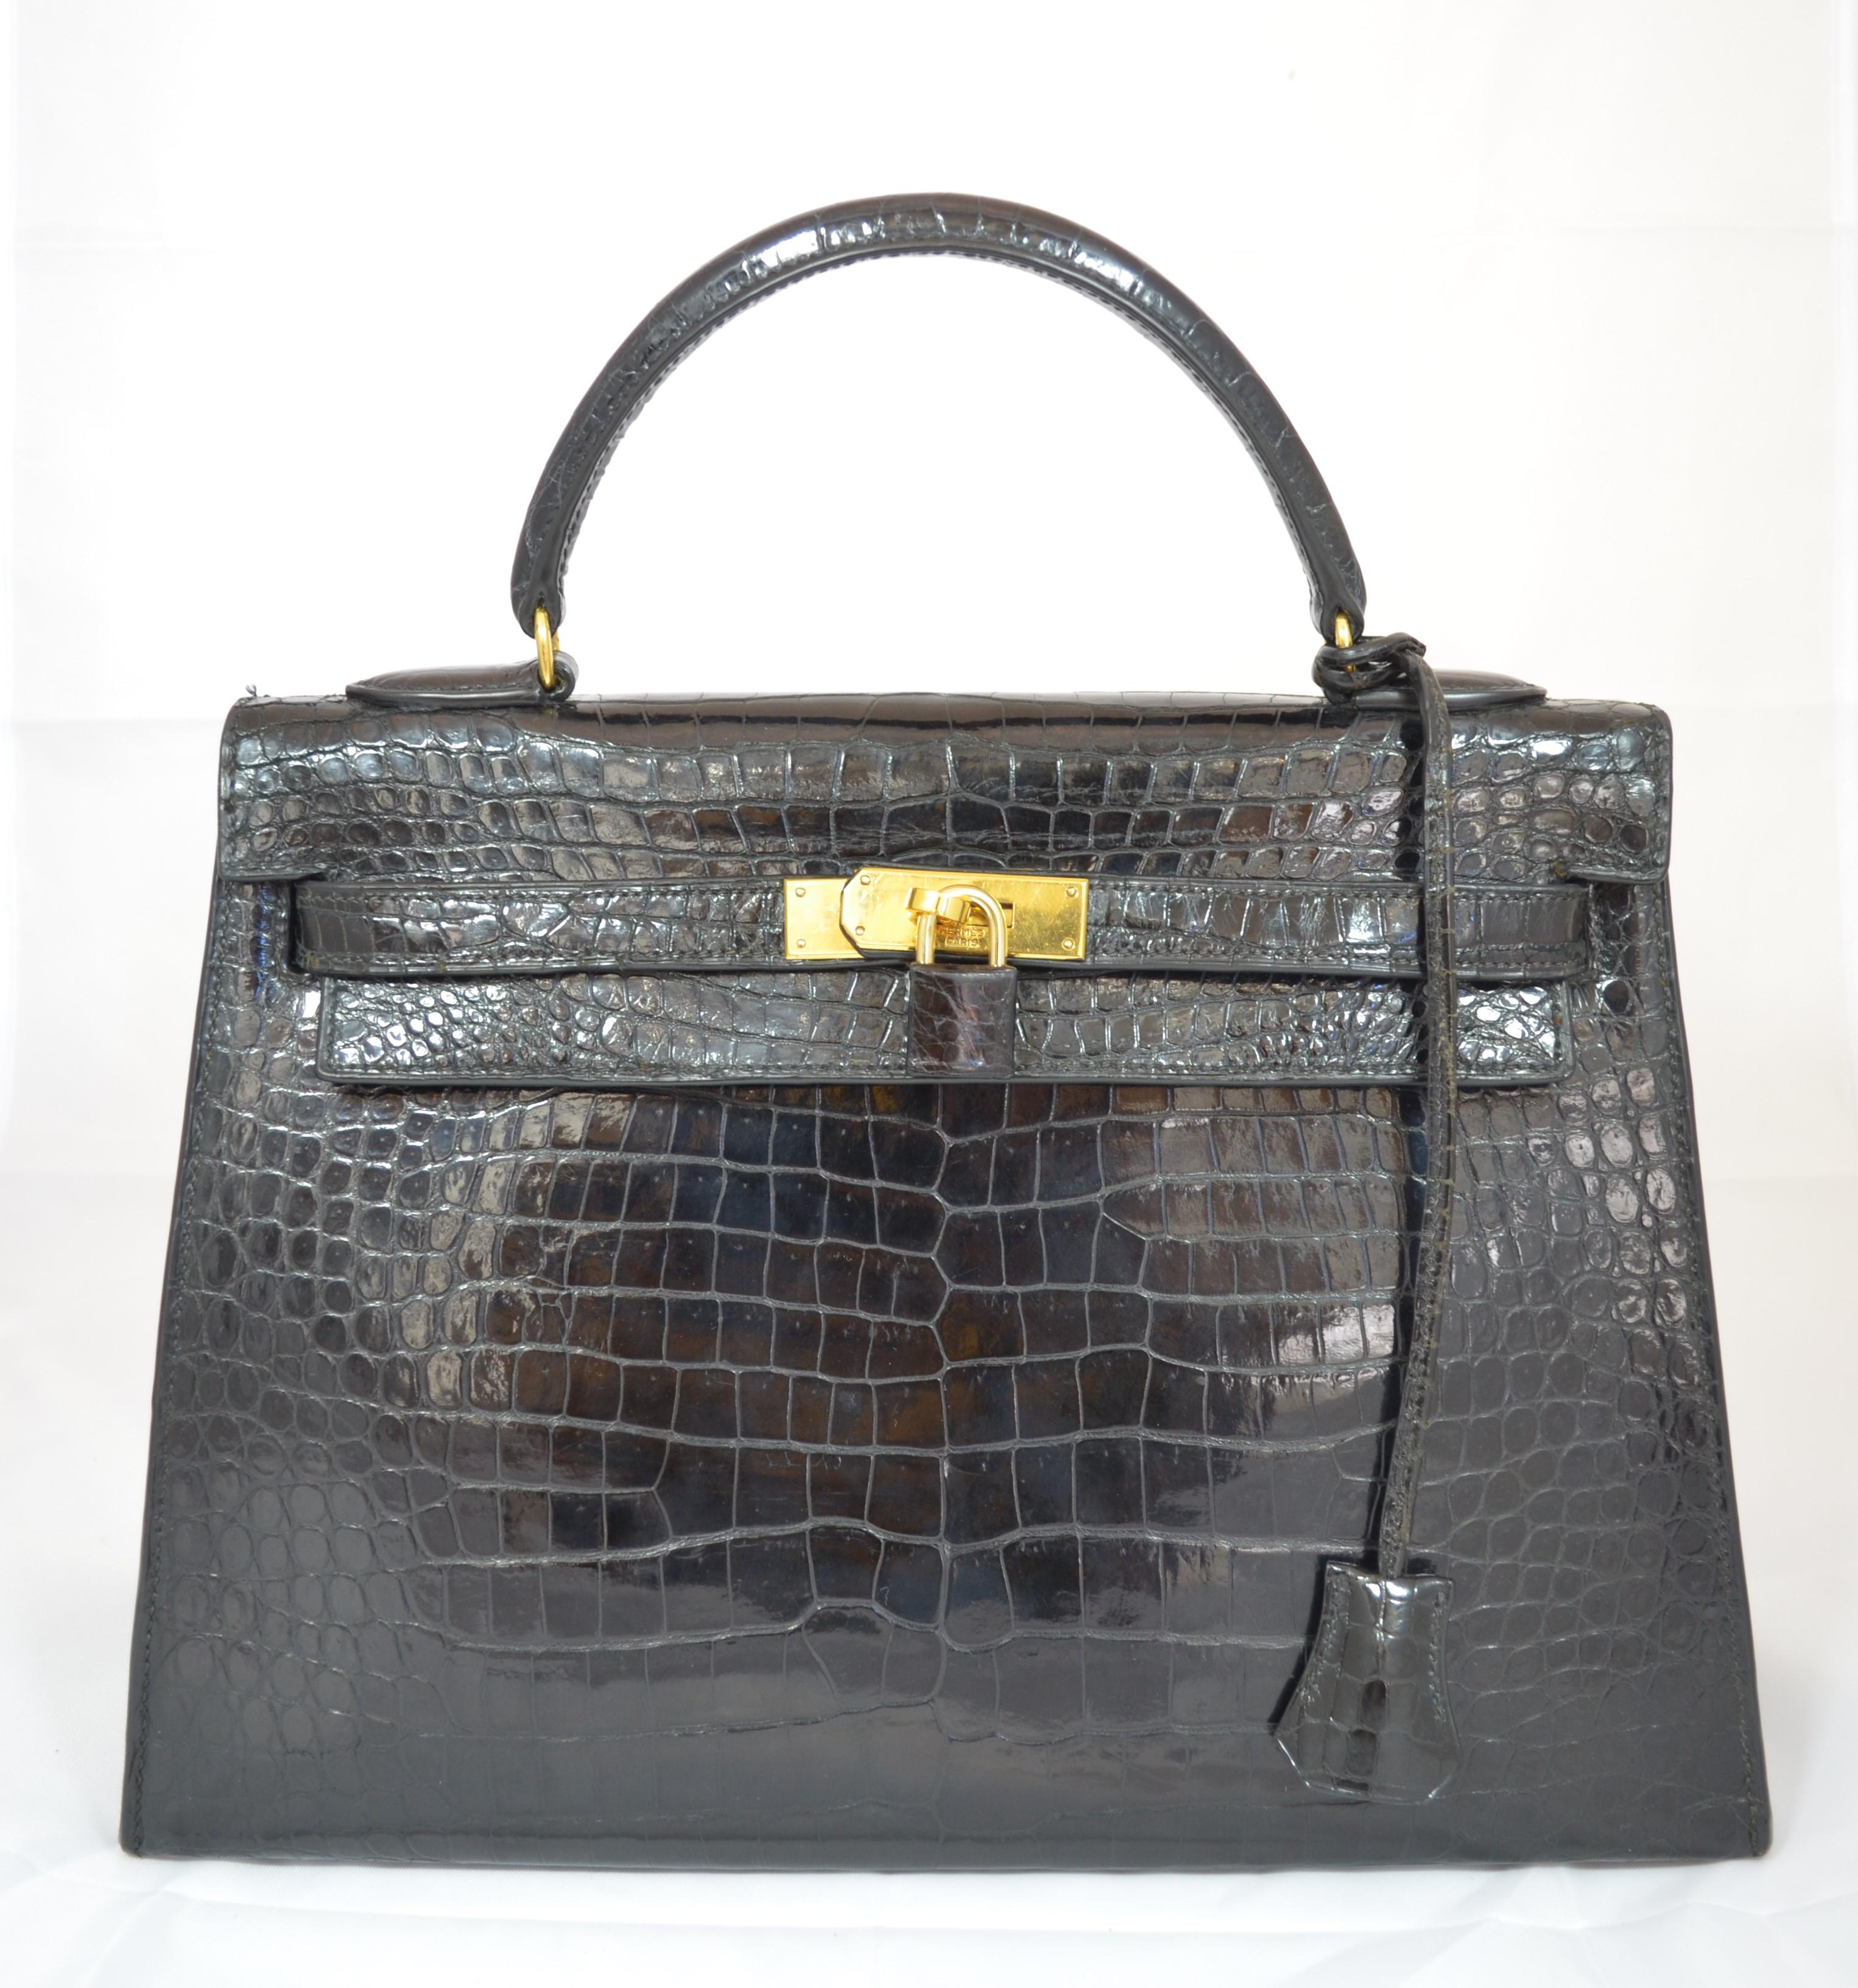 Hermès vintage Kelly bag featured in black crocodile with gold hardware, size 32cm, strap included, croc-covered padlock with cloche, fully lined leather interior with three slip pockets. Four protective metal feet at the base of the bag. Made in